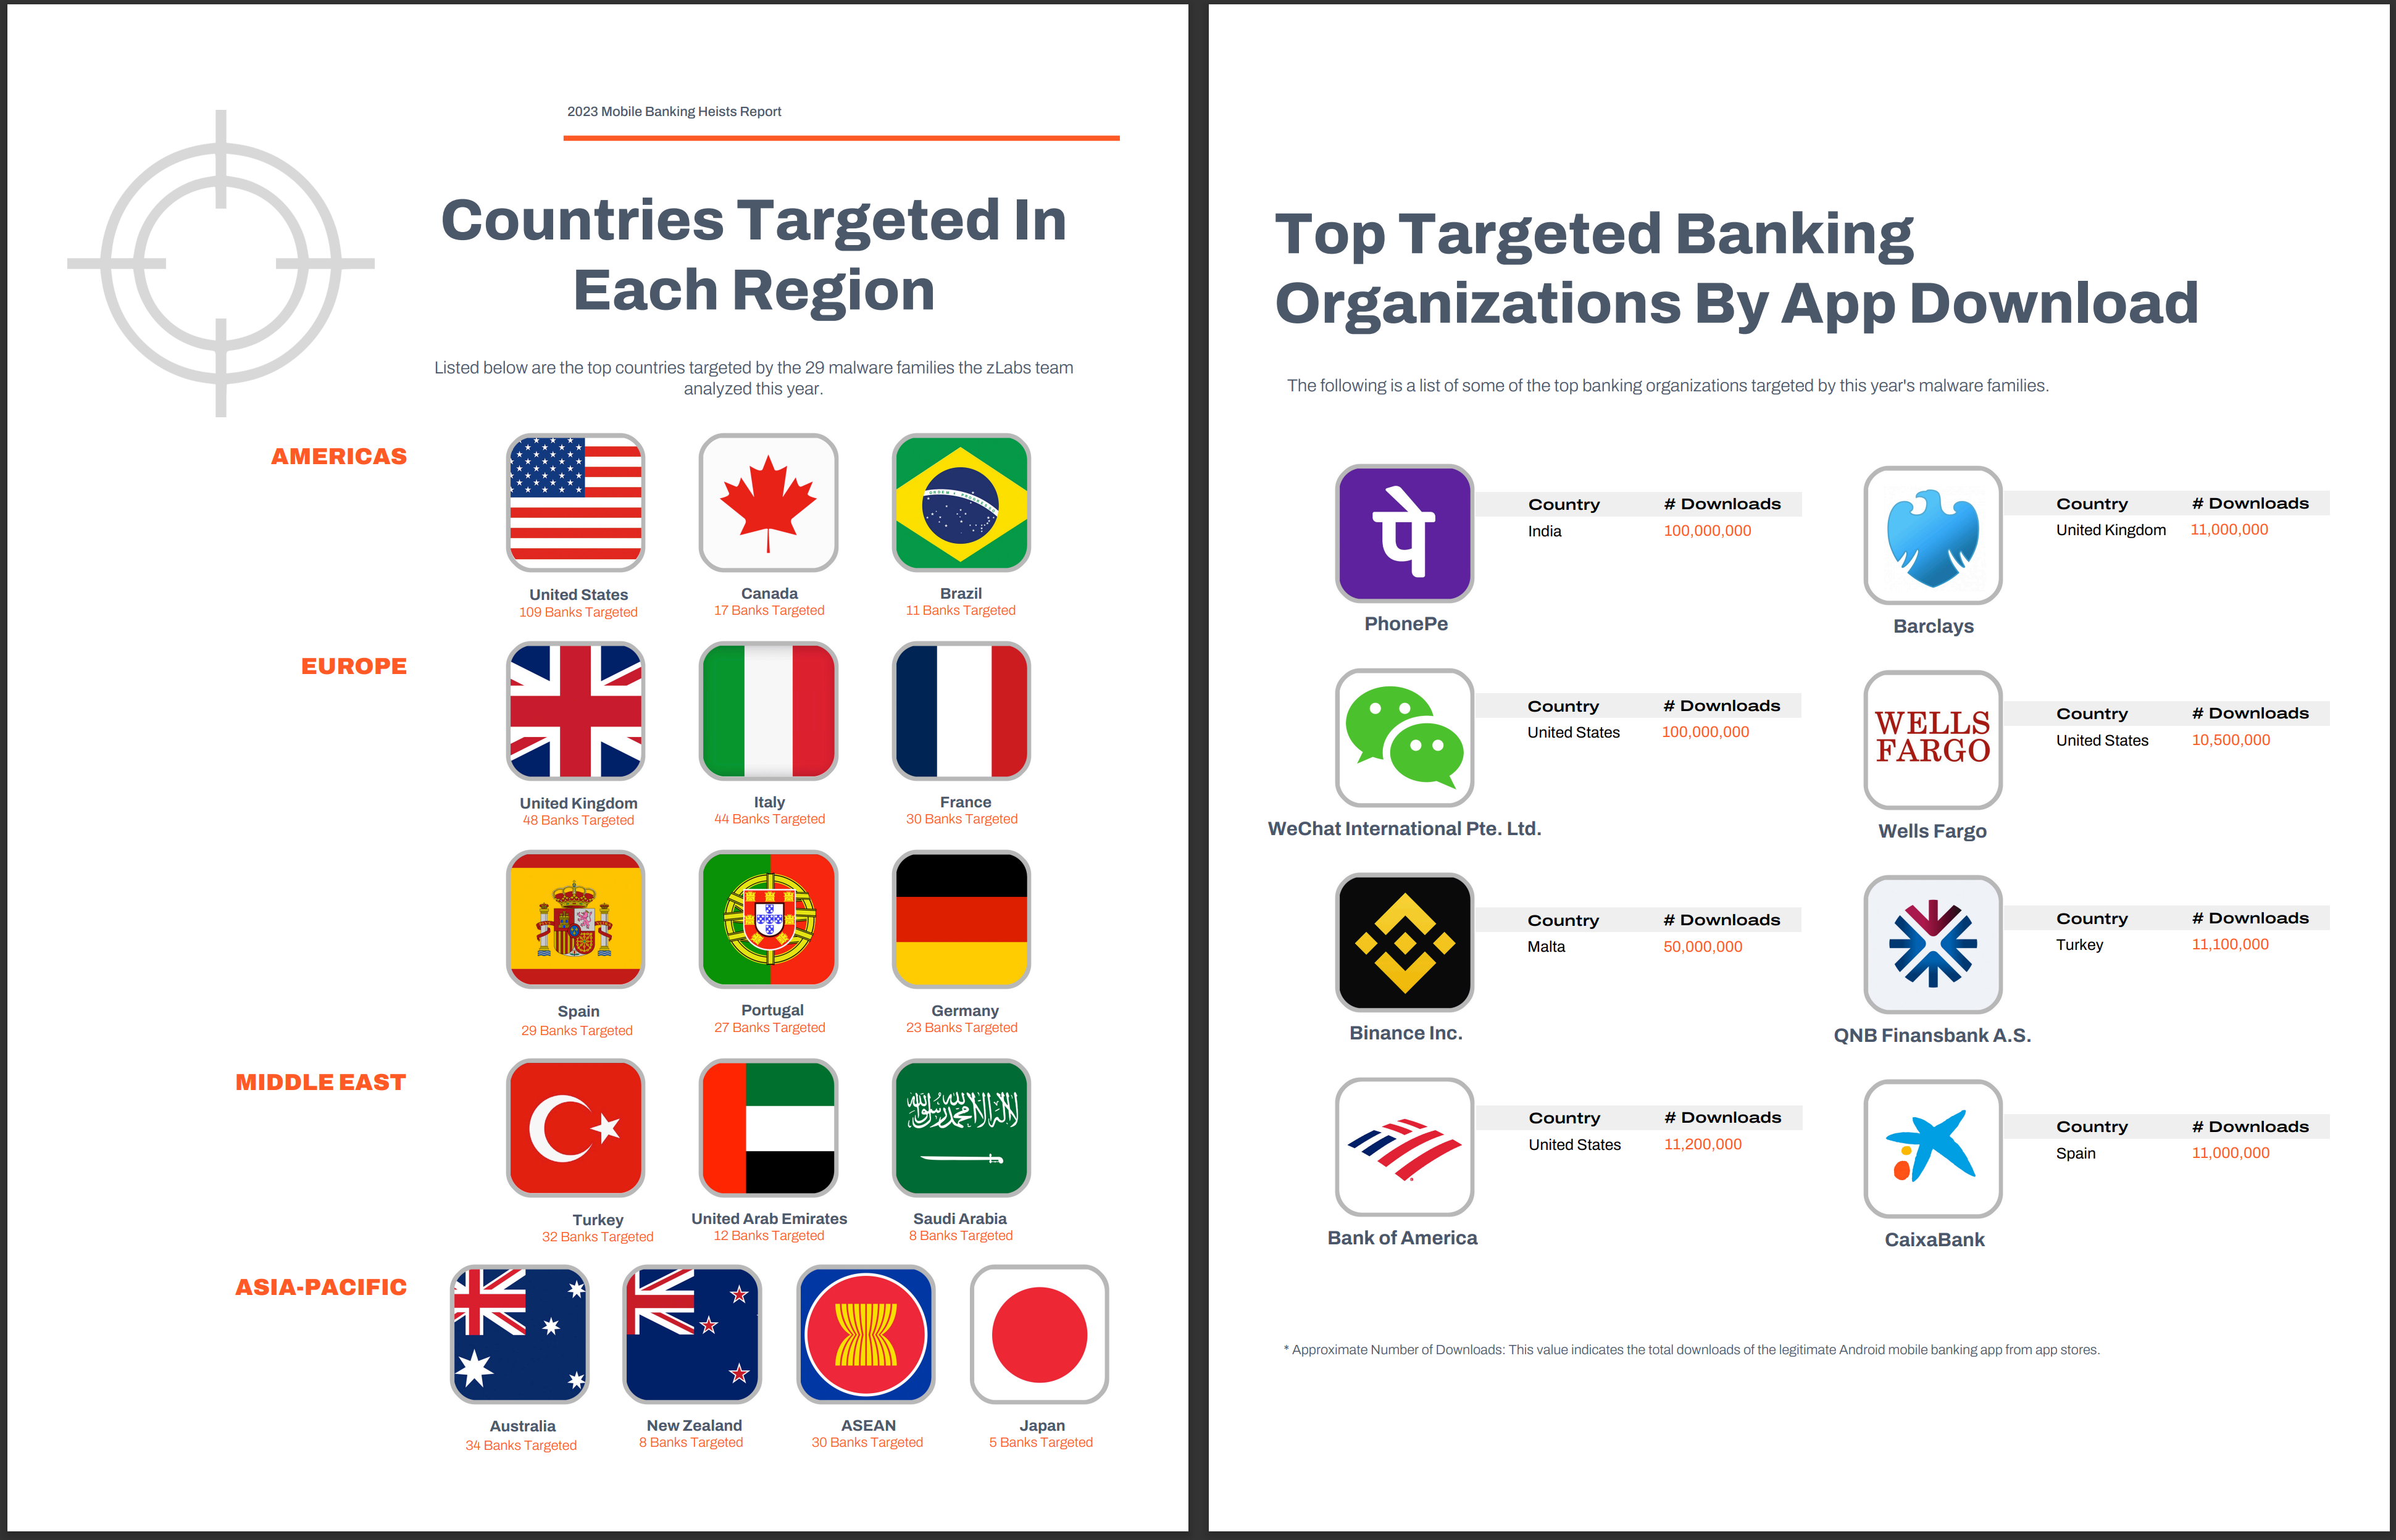 A worrisome spike in banking trojans unveils 10 new variants targeting 985 Android apps across 60 countries, circumventing 2FA and posing significant cybersecurity threats on a global scale.